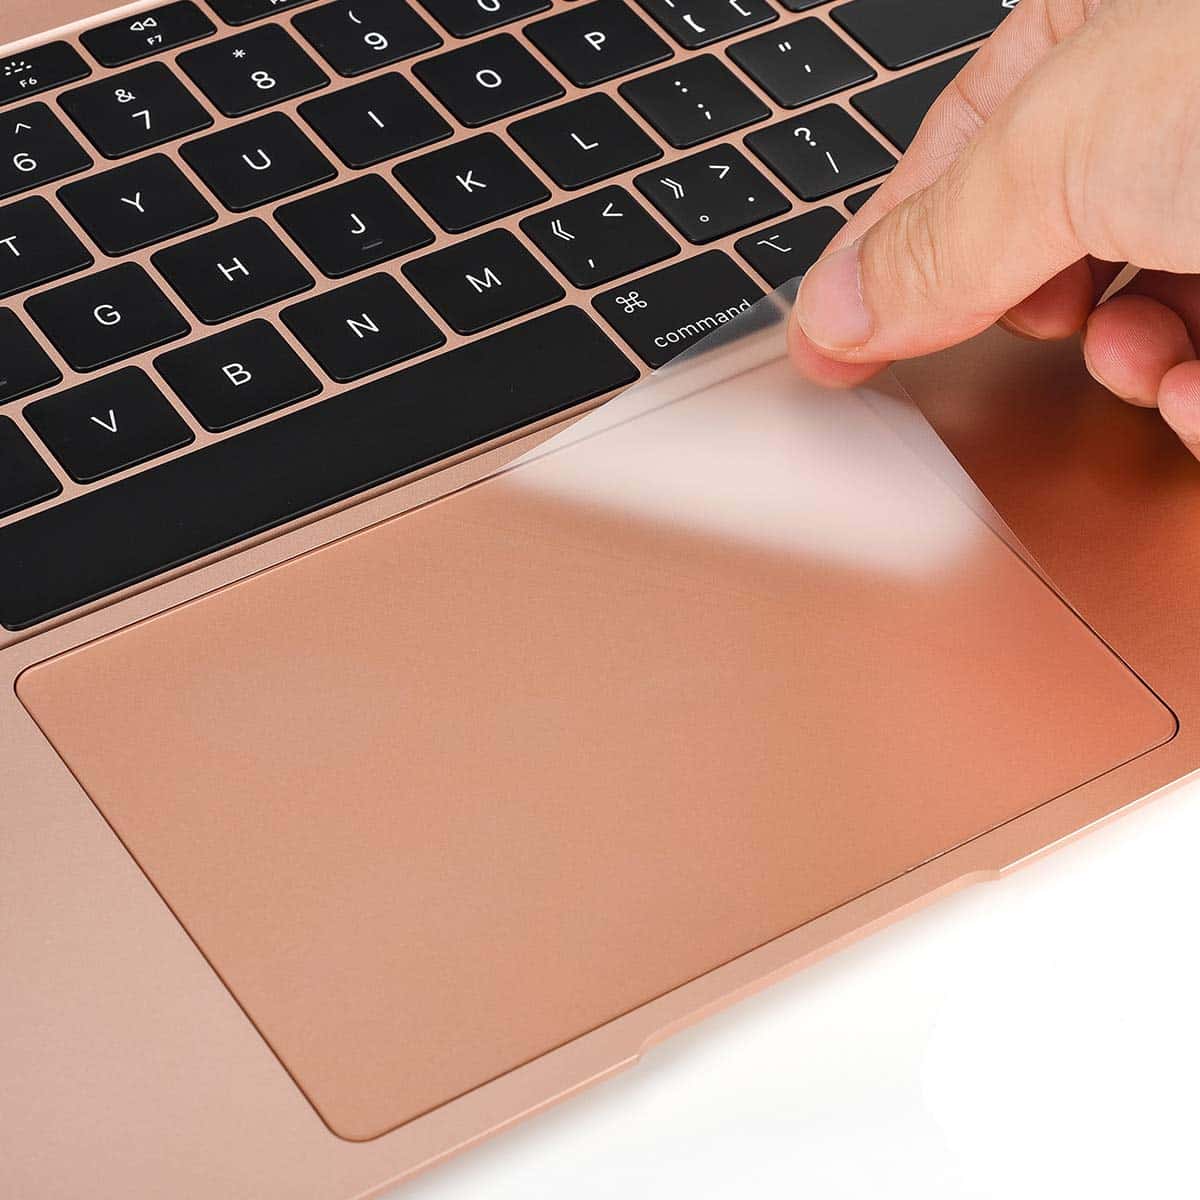 Trackpad protector for MacBook Air